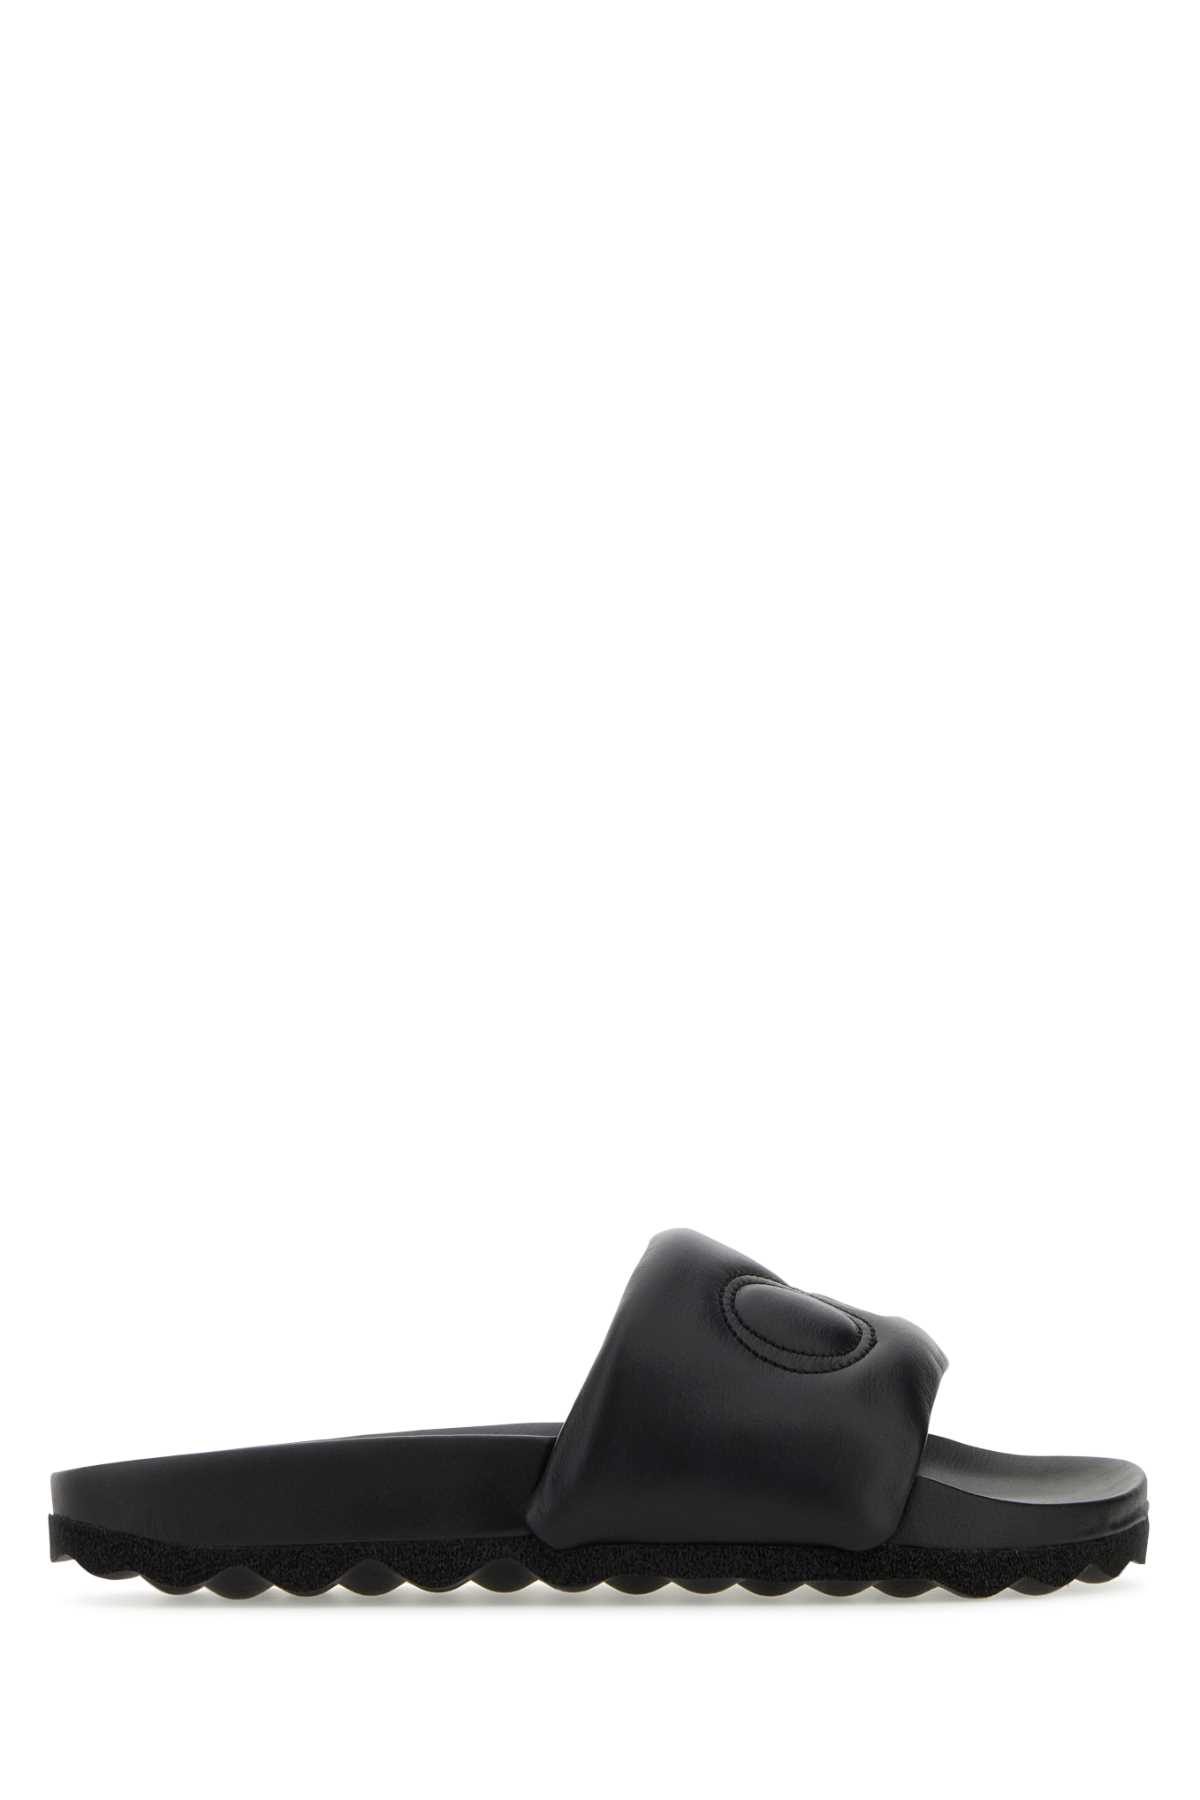 Off-White Black Leather Bookish Slippers